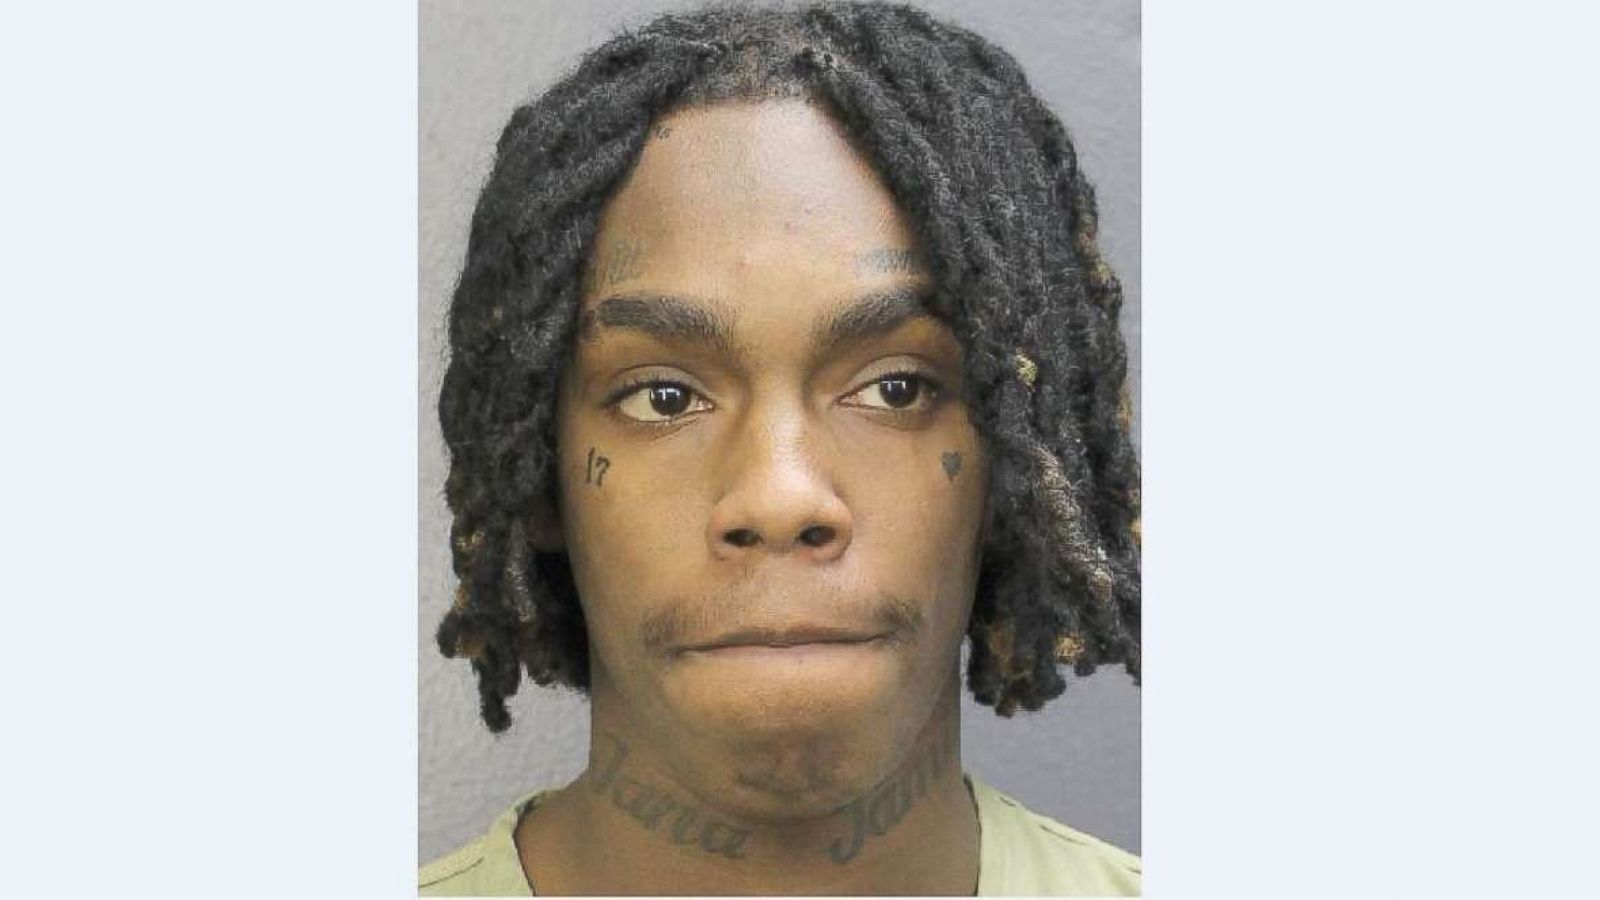 South Florida Rapper Ynw Melly Who Penned Hit Song Murder On My Mind Charged With Murdering 2 Friends Abc News